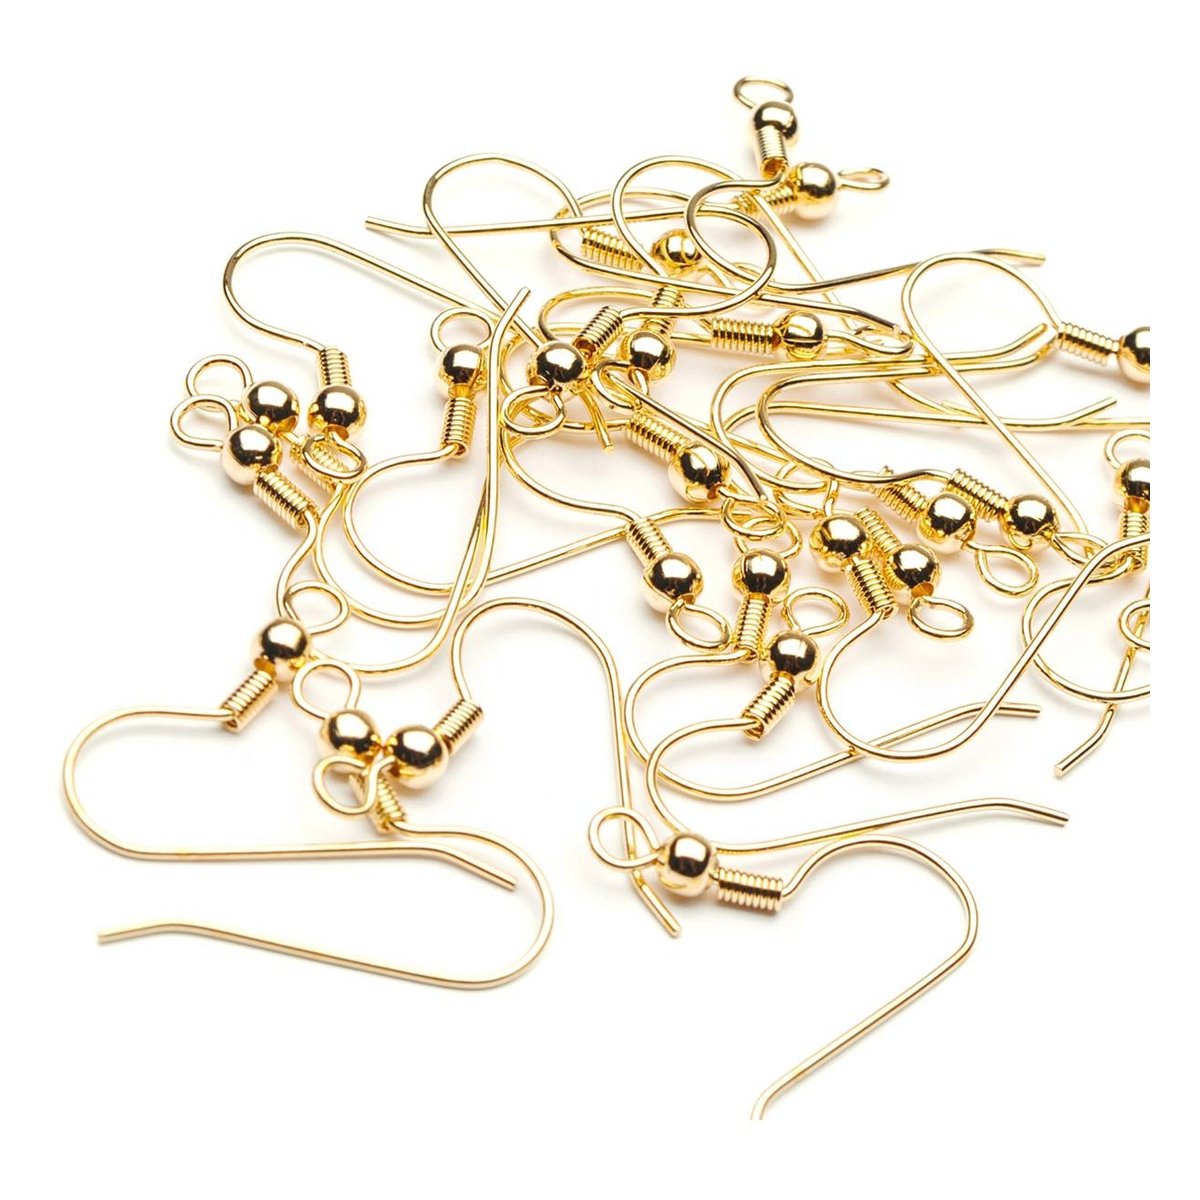 https://www.hobbycraft.co.uk/on/demandware.static/-/Sites-hobbycraft-uk-master/default/dw008307a4/images/large/560844_1002_1_-beads-unlimited-gold-plated-long-ballwire-fish-hooks-28-pack.jpg